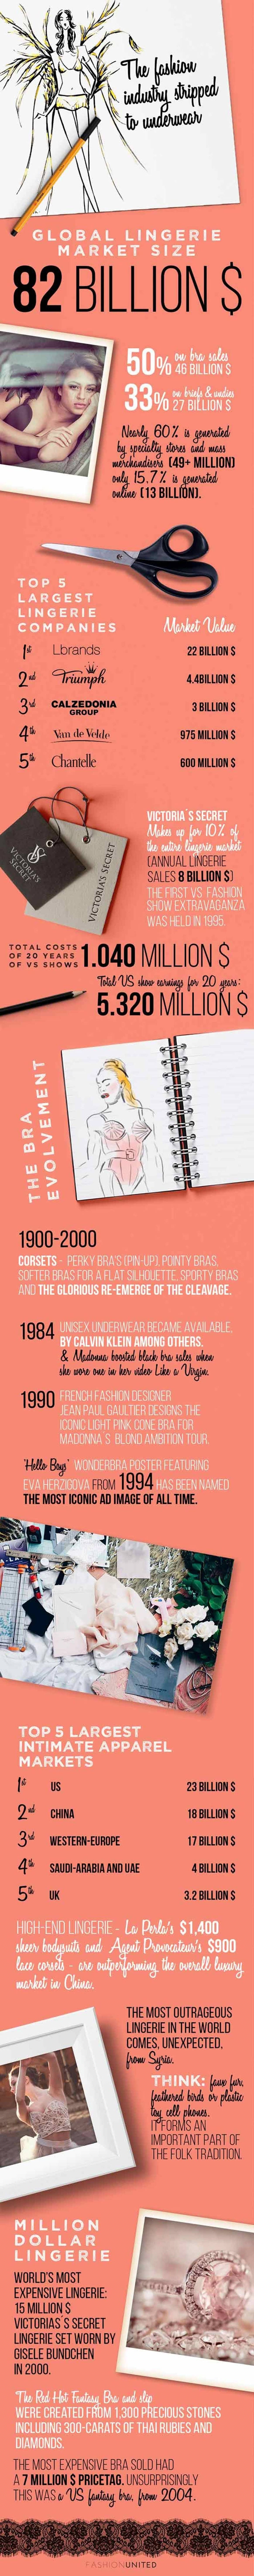 Infographic - A Lesson in Lingerie